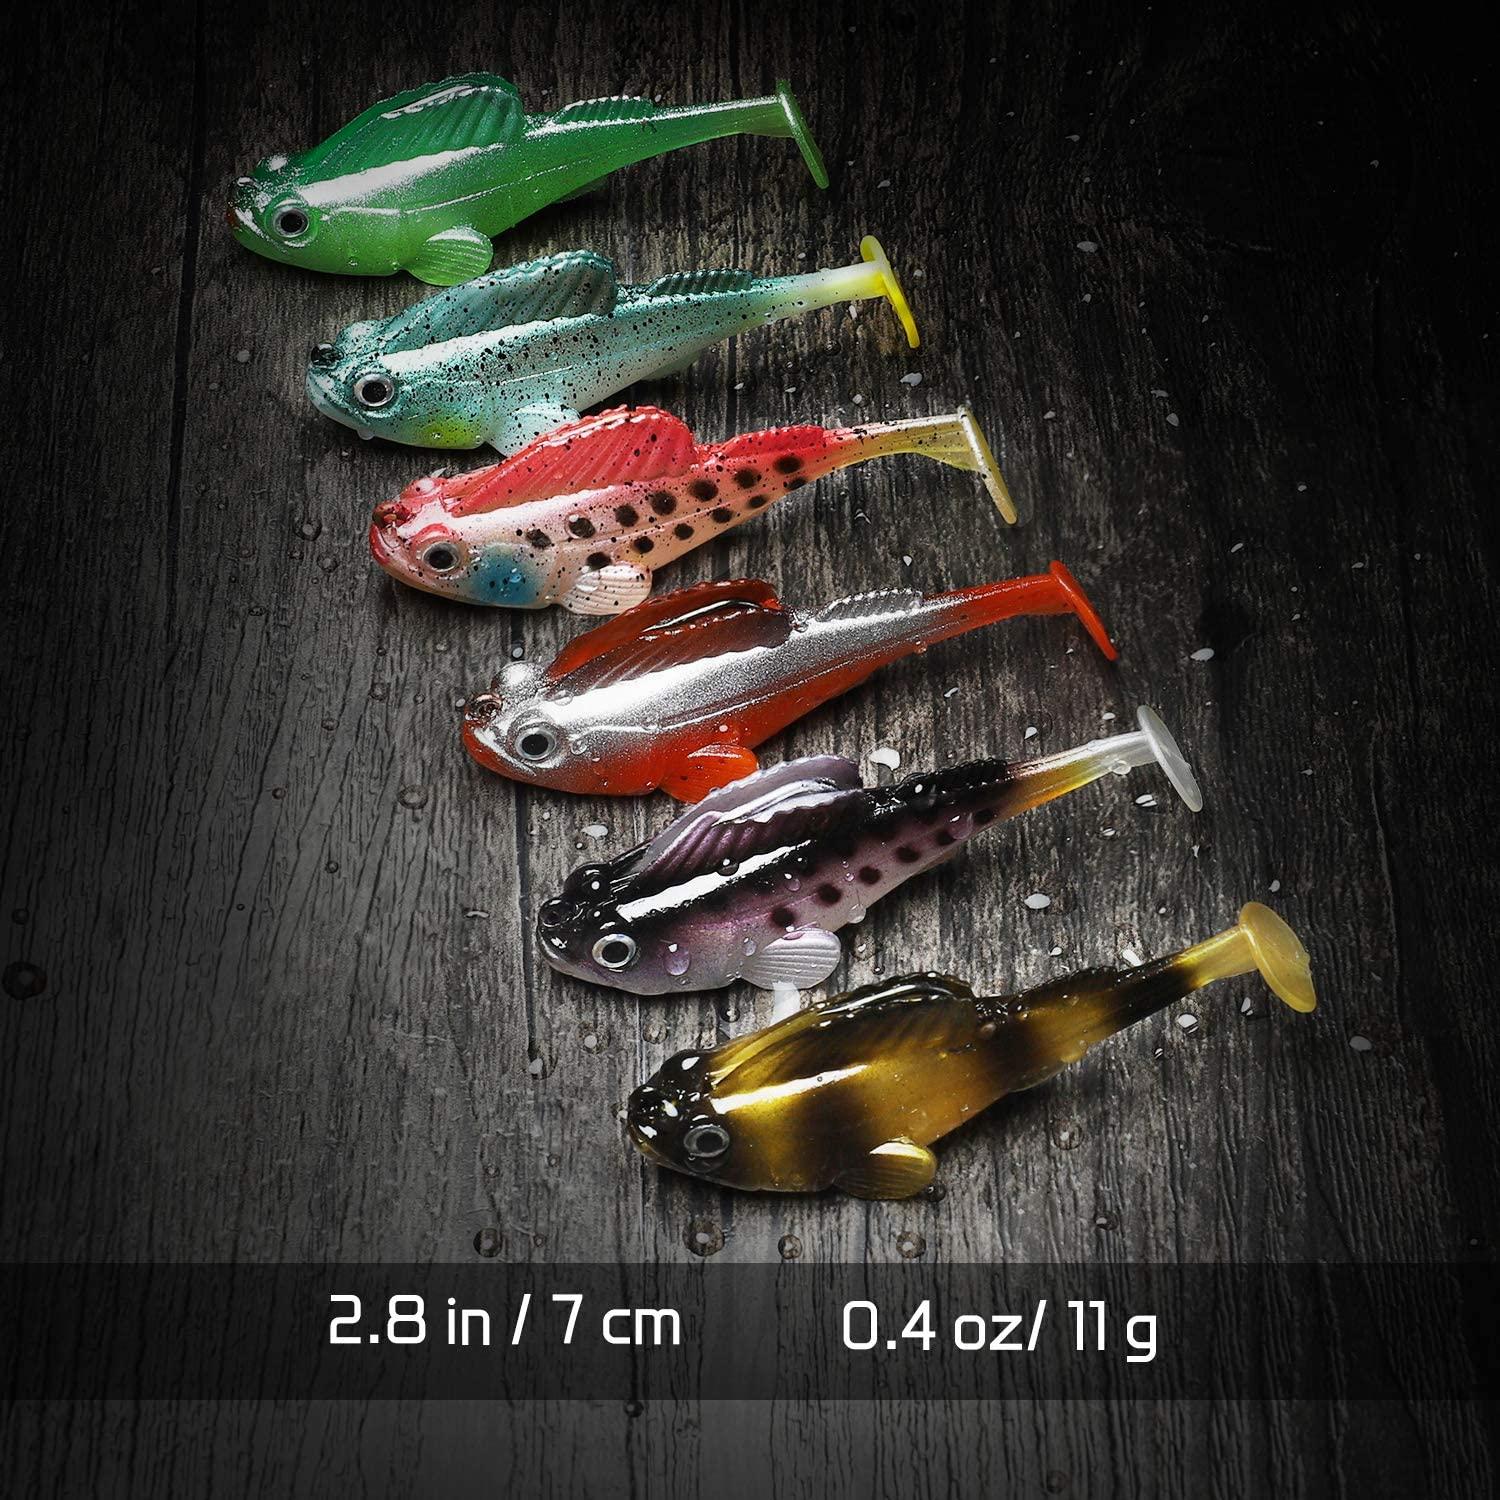 Basskiller Bass Lure Freshwater Kit, Segmented Fishing Lure with BKK Hooks, Paddle Tail Jointed Swimbaits for Bass Fishing, Sinking Action Trout